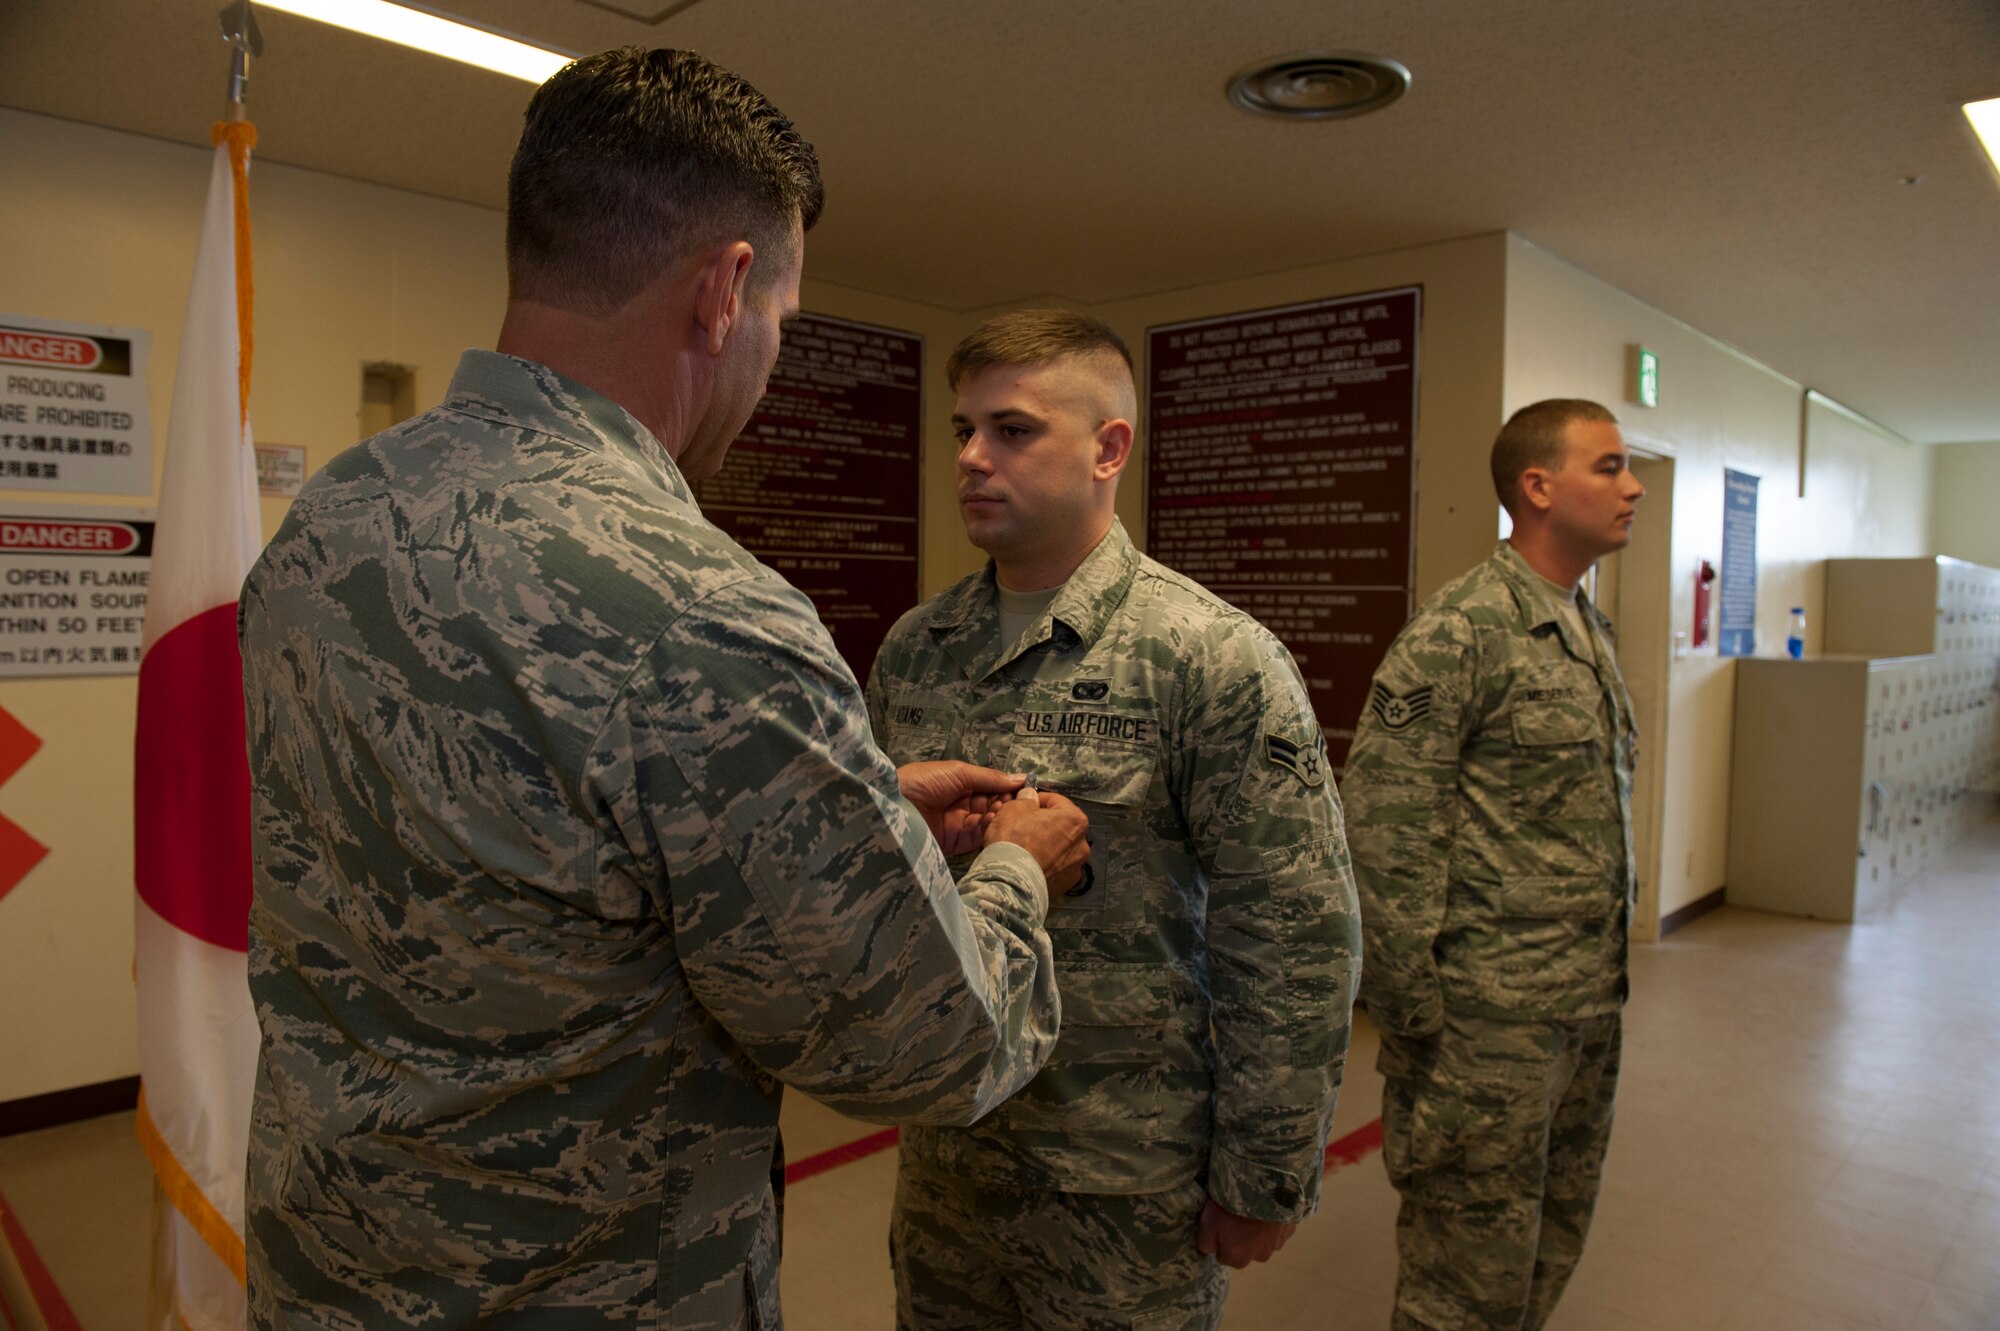 U.S. Air Force Brig. Gen. Barry Cornish, 18th Wing commander, pins the Air Force Achievement Medal on Airman 1st Class Ethan Adams, 18th Security Forces Squadron response force member, Nov. 4, 2015, at Kadena Air Base, Japan. The Air Force Achievement Medal is awarded for outstanding accomplishments and acts of courage. (U.S. Air Force photo by Airman 1st Class Lynette M. Rolen)